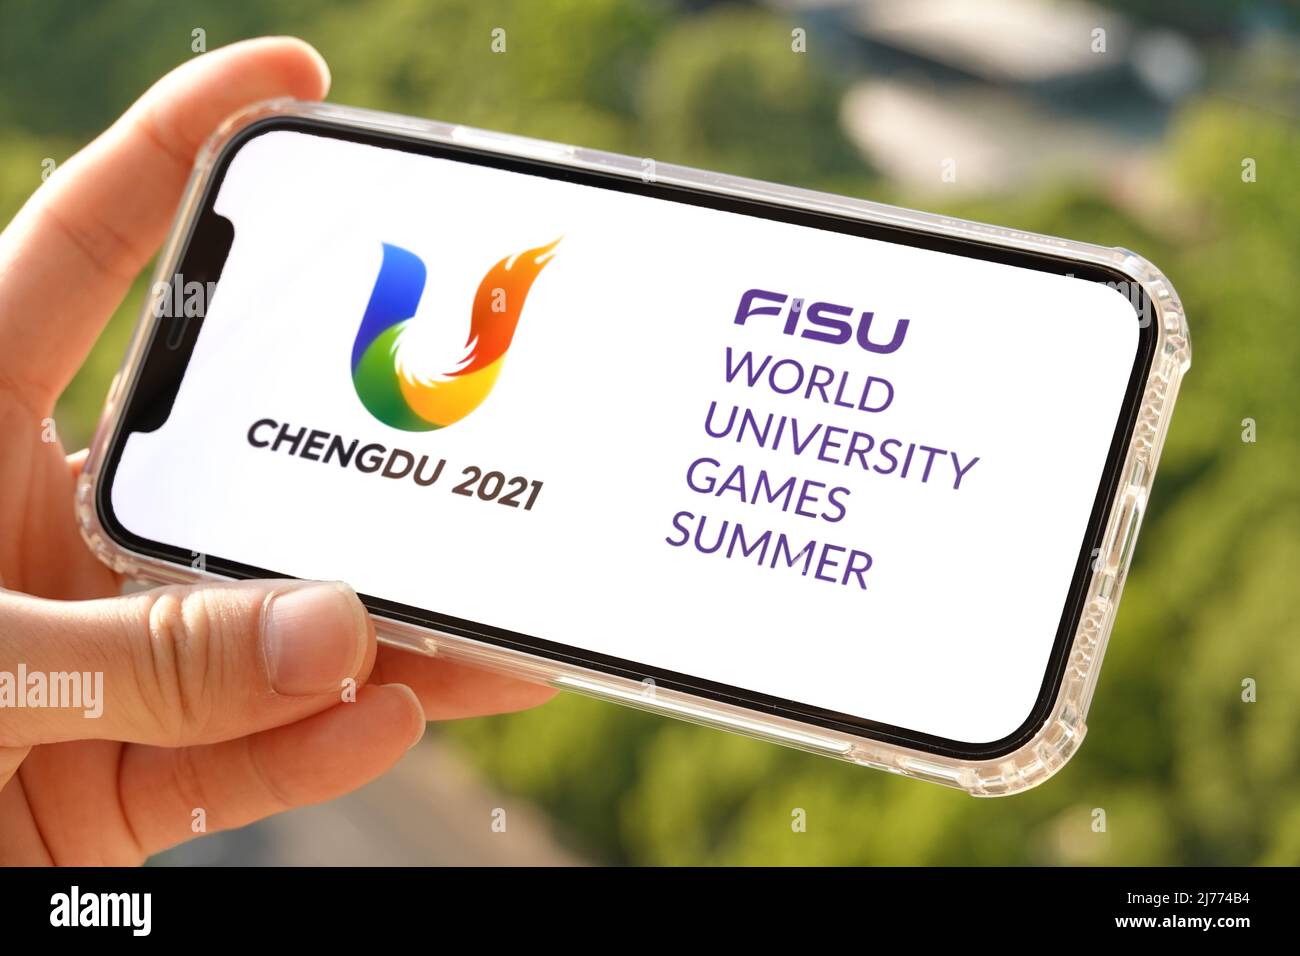 In this photo illustration, the logo of Chengdu World University Games is displayed on a smartphone screen. The Chengdu 2021 World University Games has been postponed until 2023, the International University Sports Federation (FISU) announced on Friday.The FISU Games had initially been scheduled for the summer of 2021 but were rescheduled for June this year following the postponement of the Olympic Games in Tokyo 2020. (Photo by Sheldon Cooper / SOPA Images/Sipa USA) Stock Photo